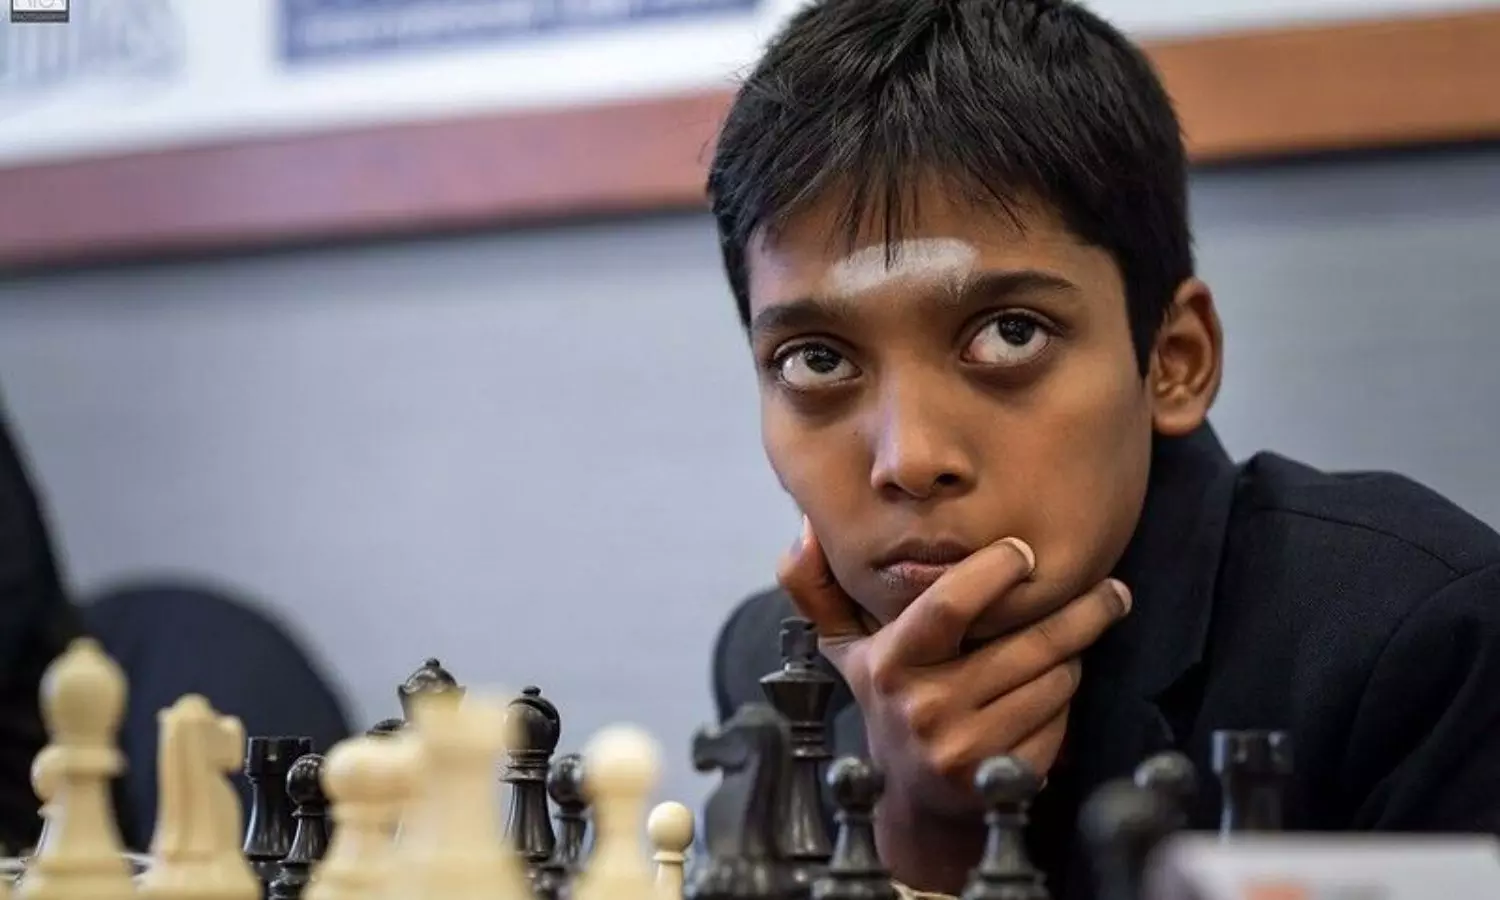 Don't get carried away — chess prodigy Praggnanandhaa's coach RB